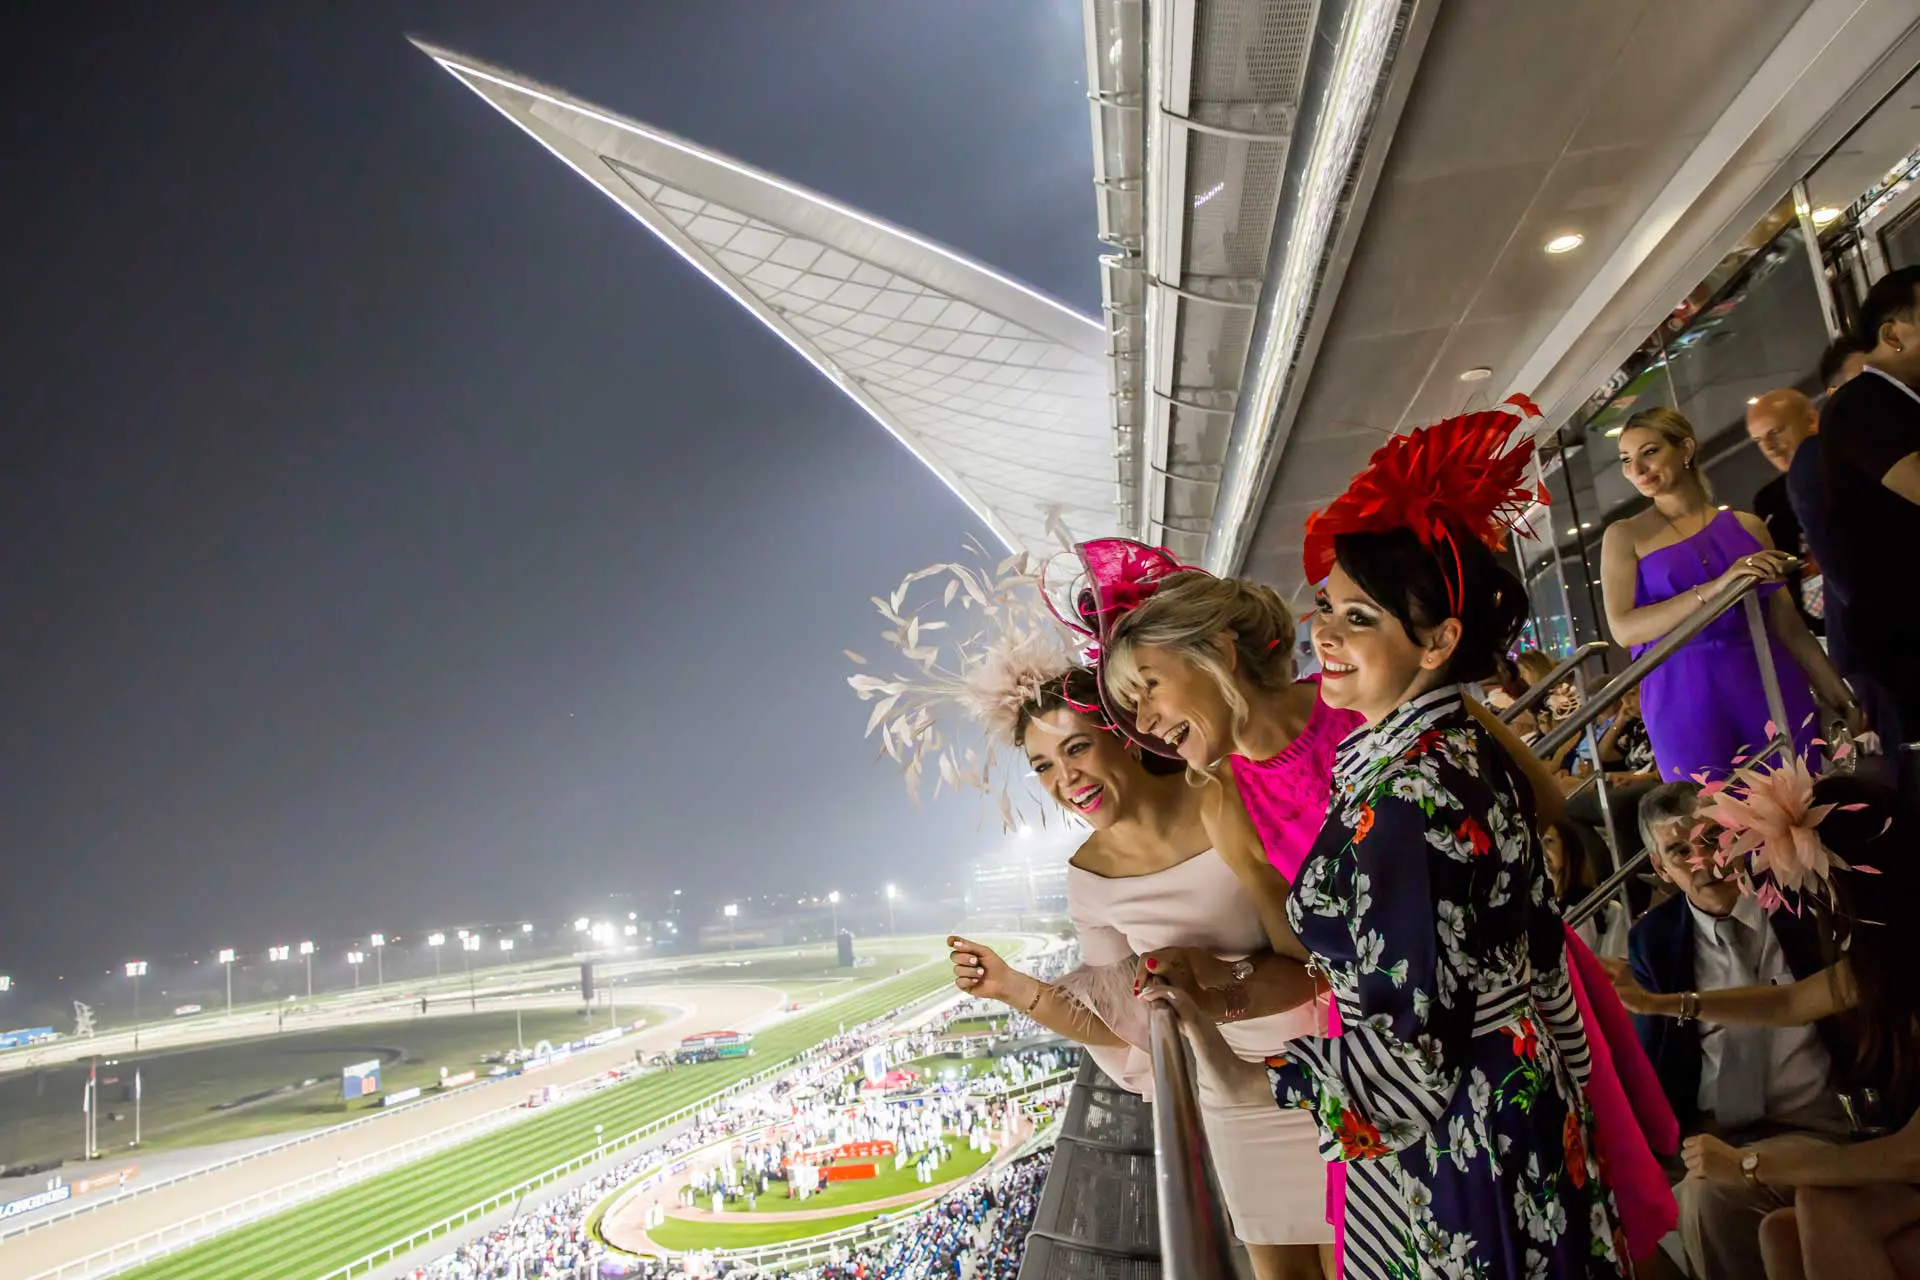 Image of 3 ladies laughing and enjoying the Dubai World Cup from their private seating area